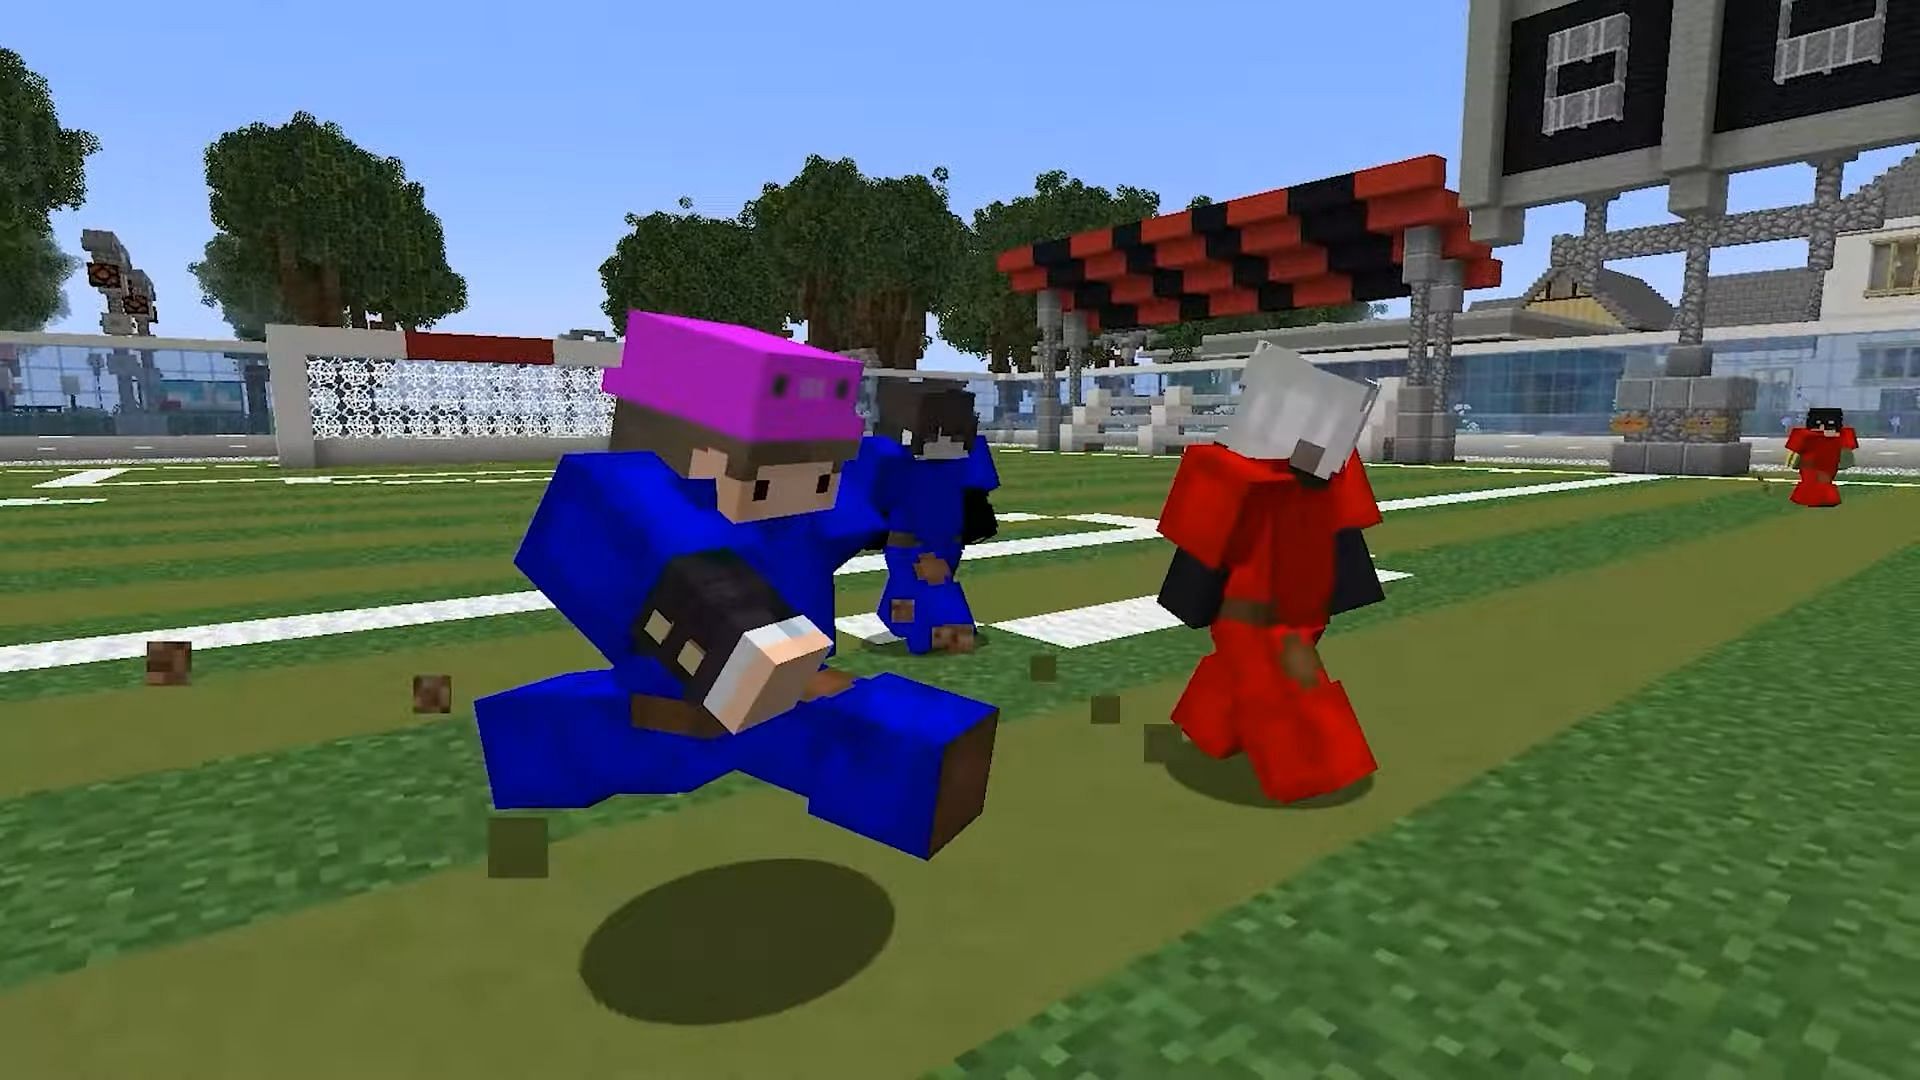 Players compete on a football pitch in a Minecraft roleplay server.